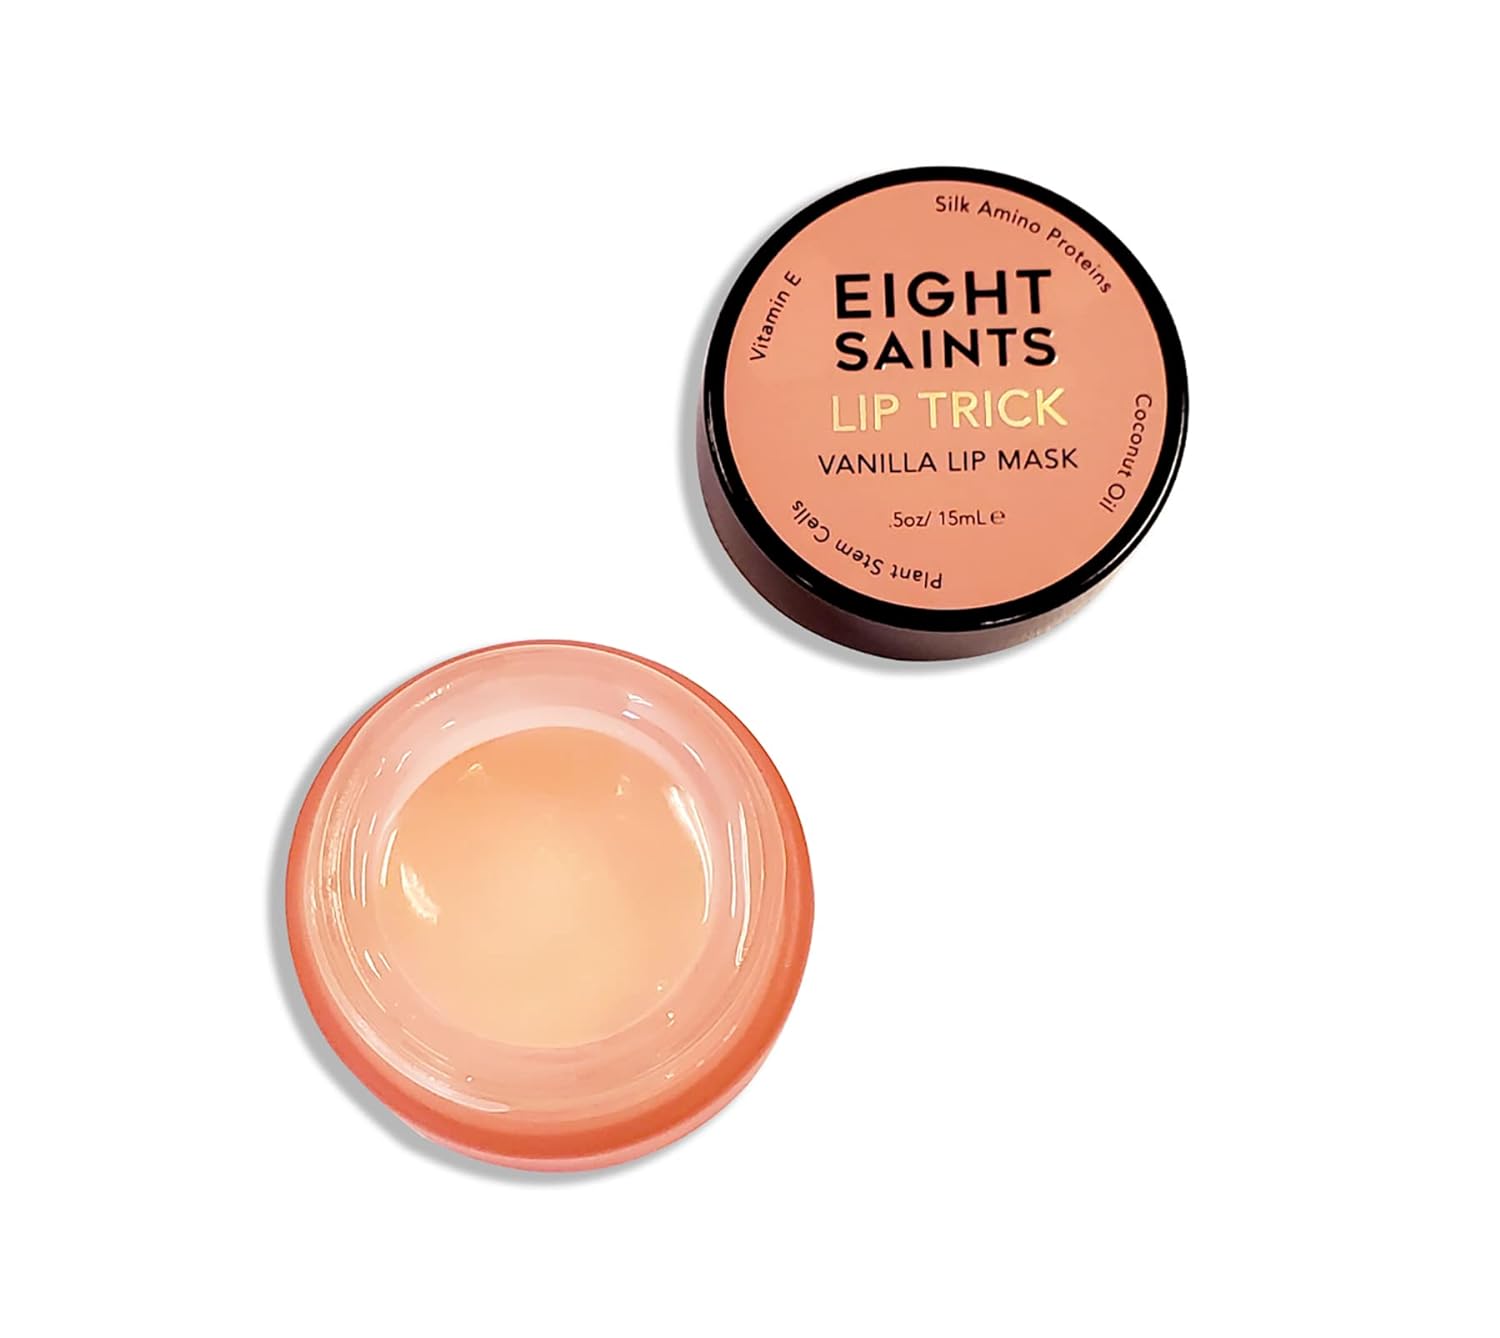 Eight Saints Lip Trick Vanilla Lip Mask, Natural and Organic Lip Gloss Treatment for Full, Soft Lips, Plumping, Hydrating, and Wrinkles, 0.5 Ounces